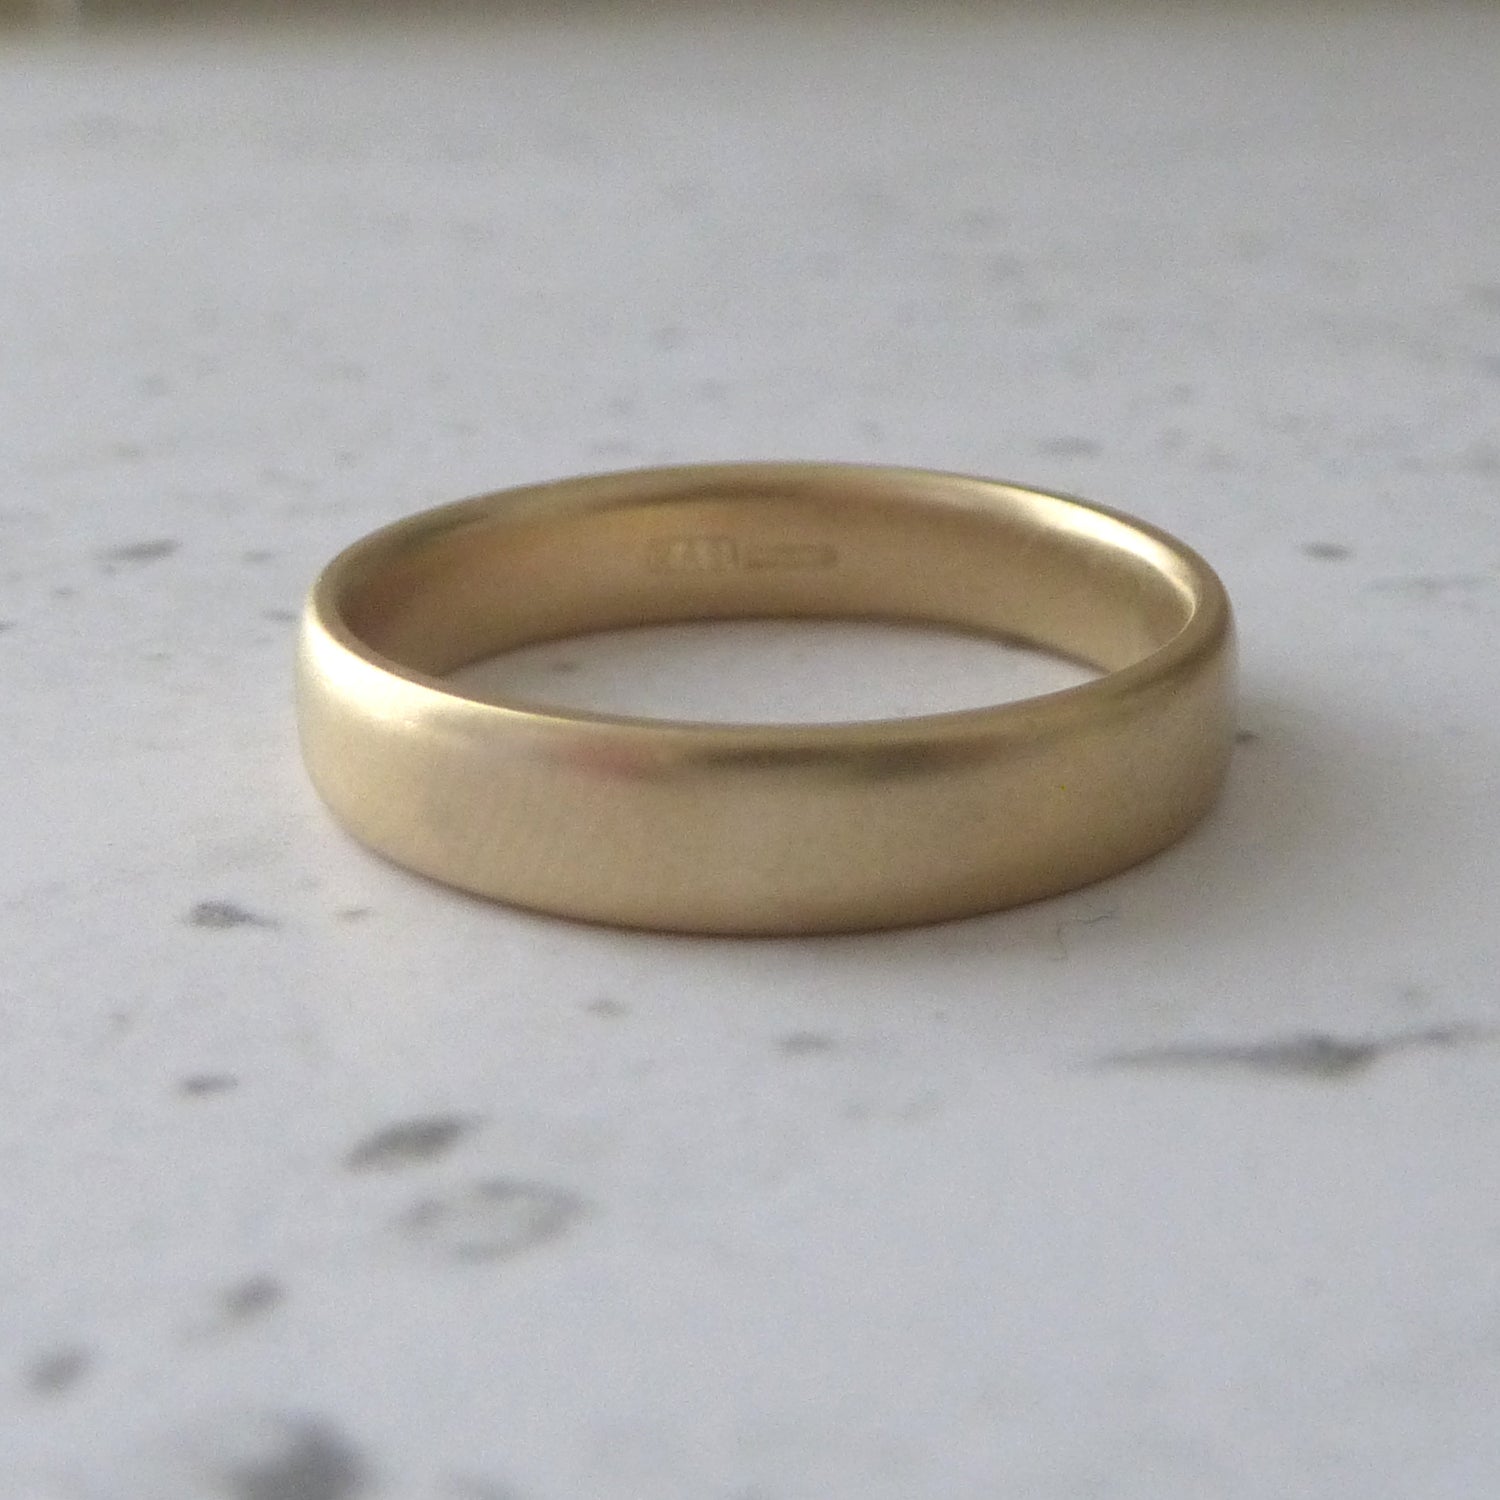 Smooth finish hand made wedding band, 9ct yellow recycled gold, satin finish